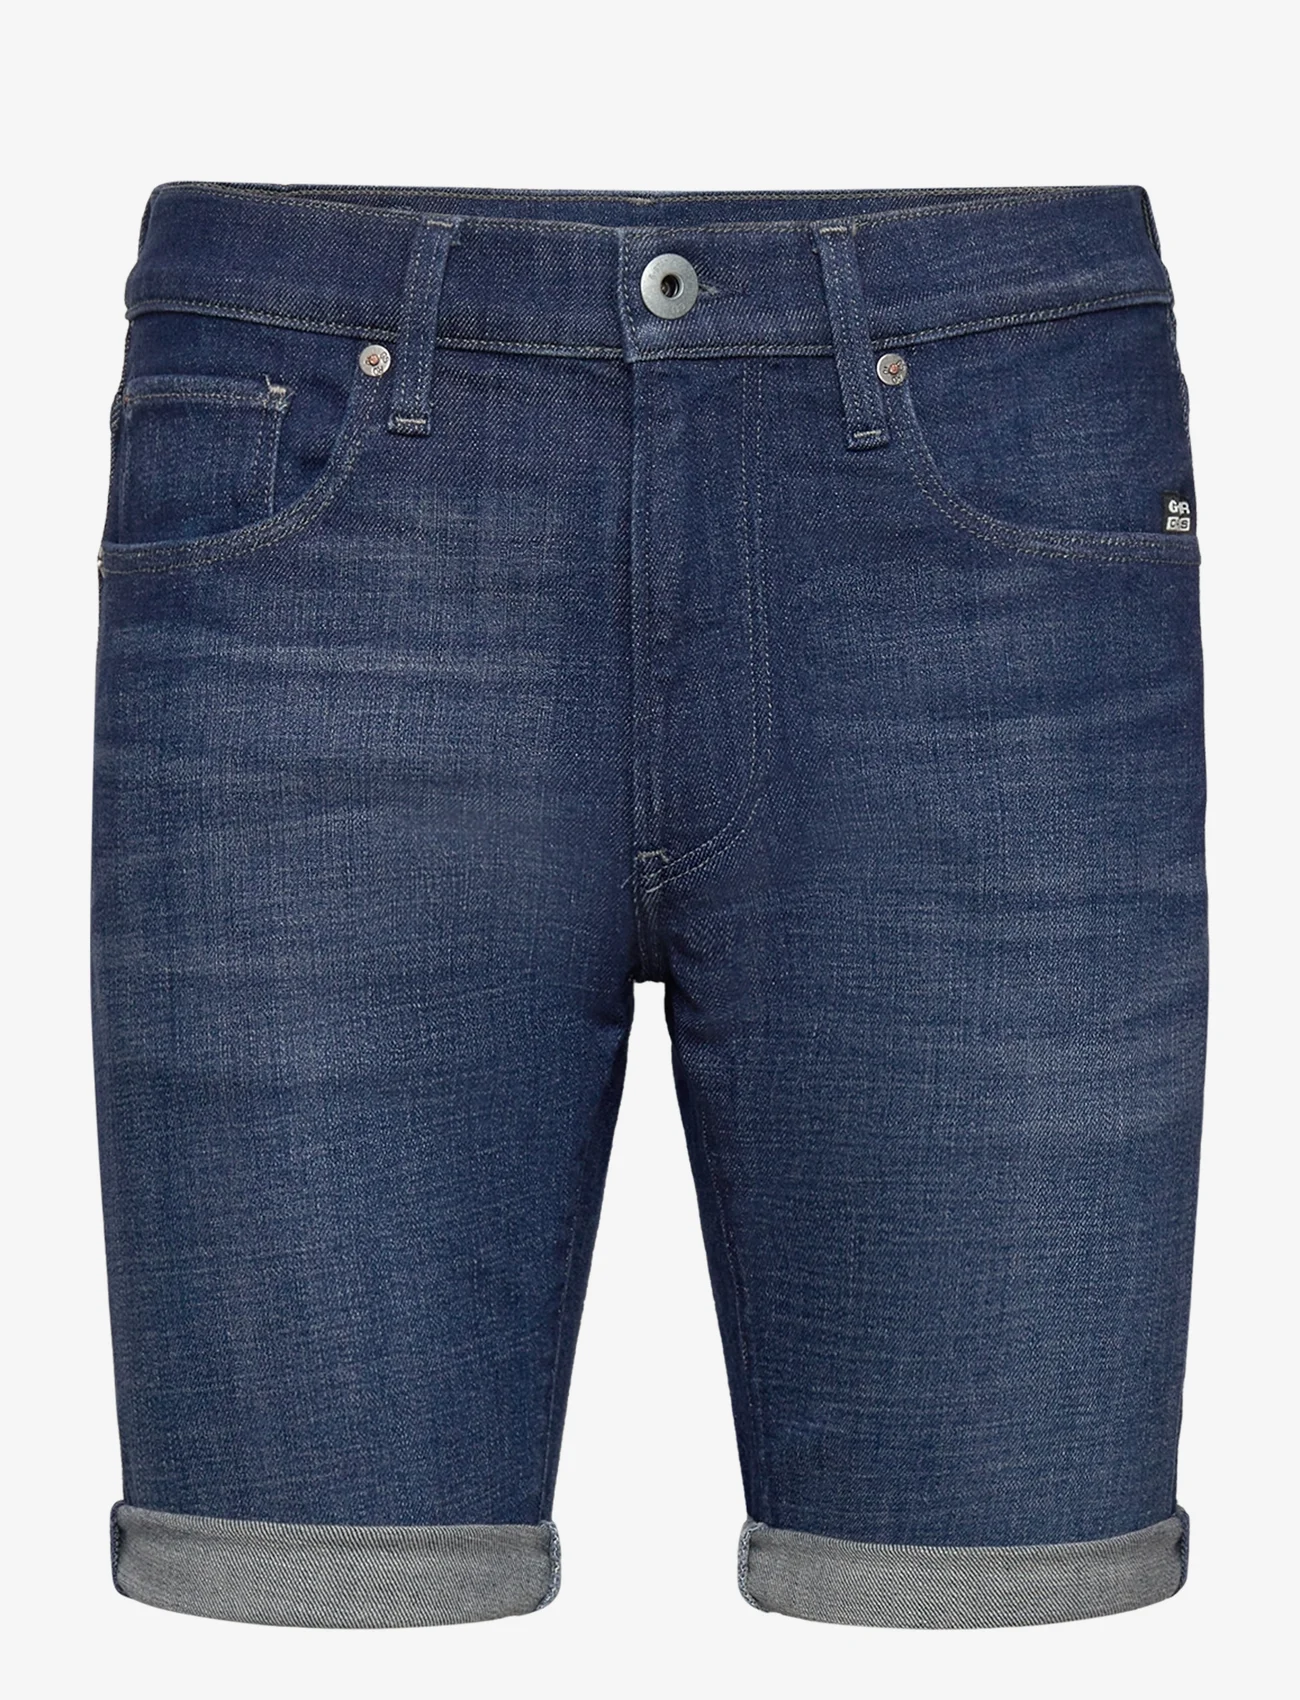 G-Star RAW - 3301 Slim Short - jeans shorts - faded blue copen - 0